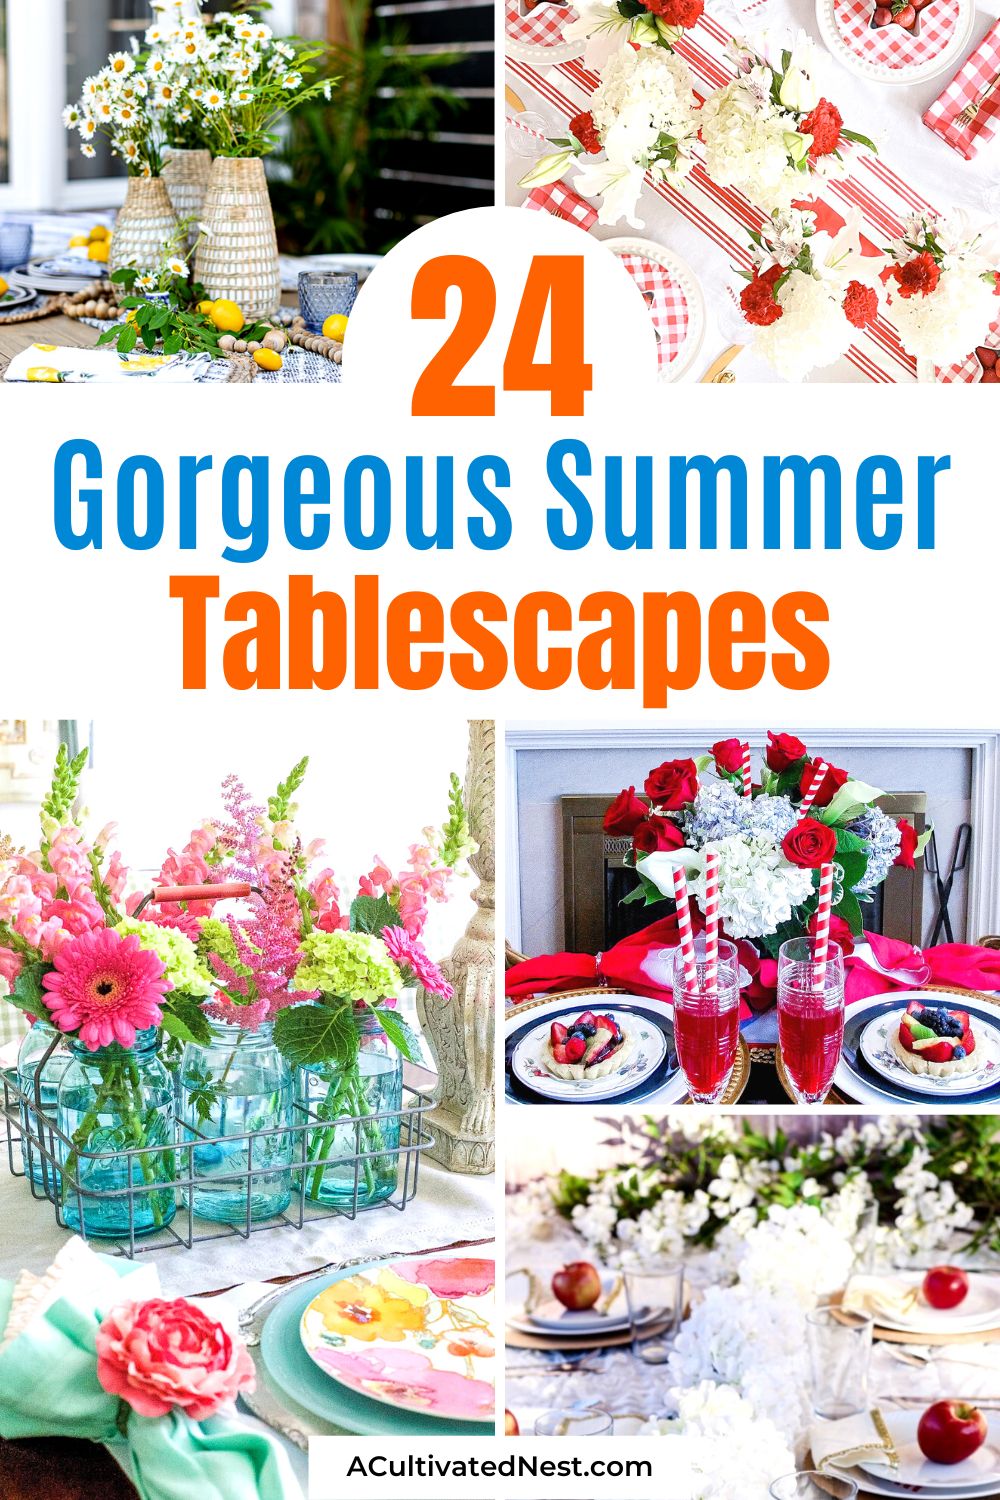 24 Gorgeous Summer Tablescapes- Capture the essence of the sunny season with these inspiring summer tablescapes. Incorporate bright colors, playful patterns, and elements inspired by nature to create visually stunning arrangements and complete the summer vibe! | #tablescapes #summerDecor #frugalDecor #decorating #ACultivatedNest